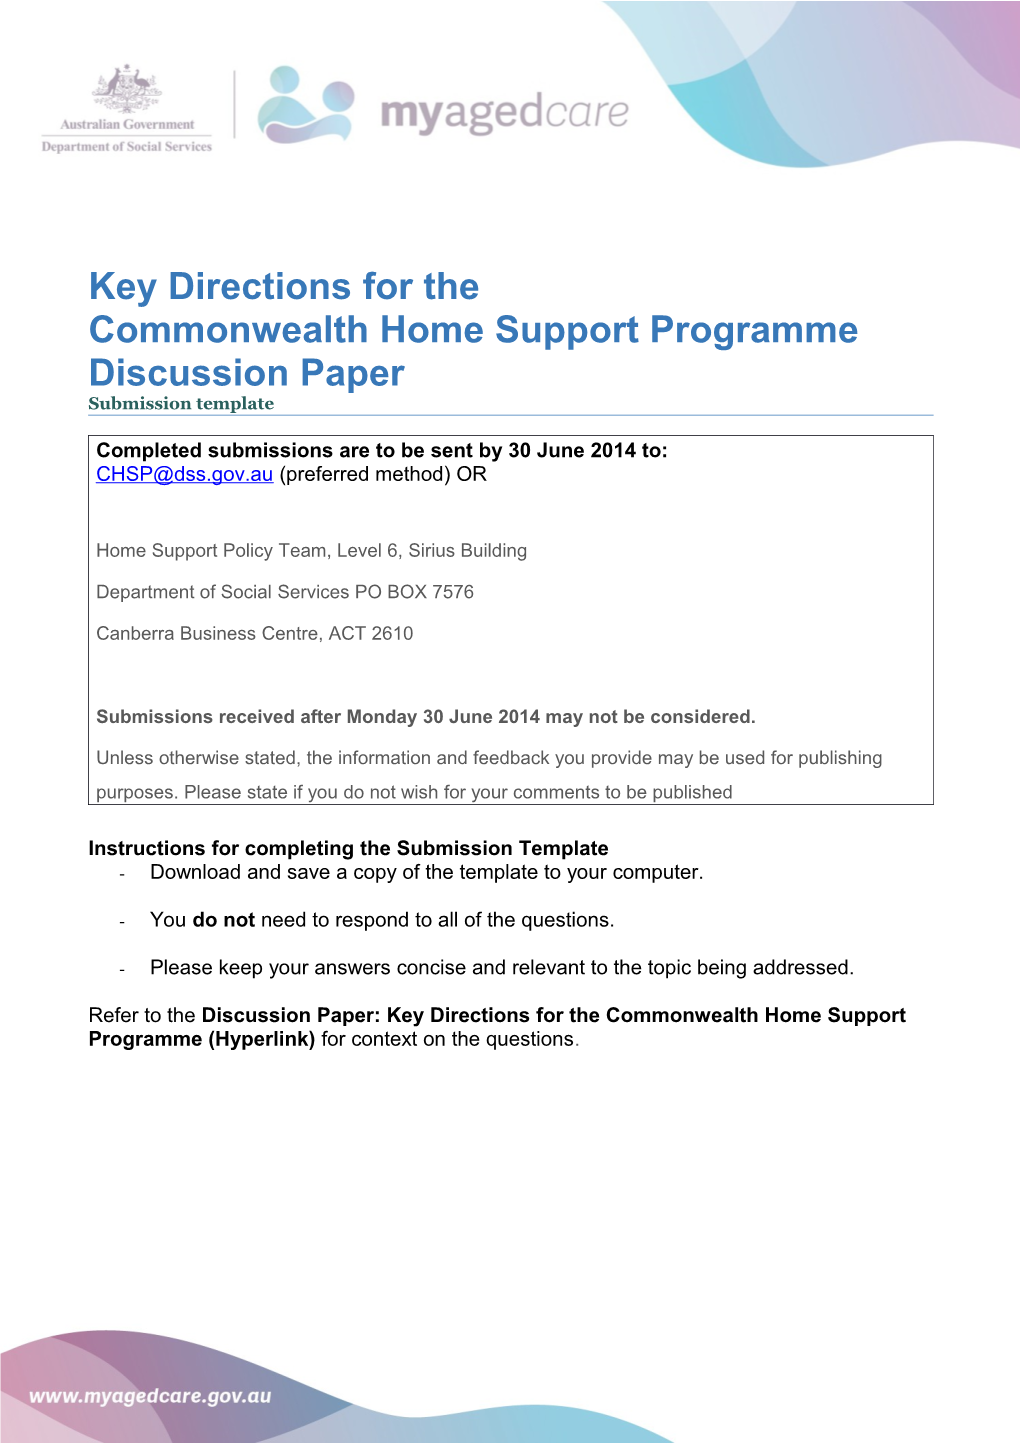 Key Directions for the Commonwealth Home Support Programme Discussion Paper